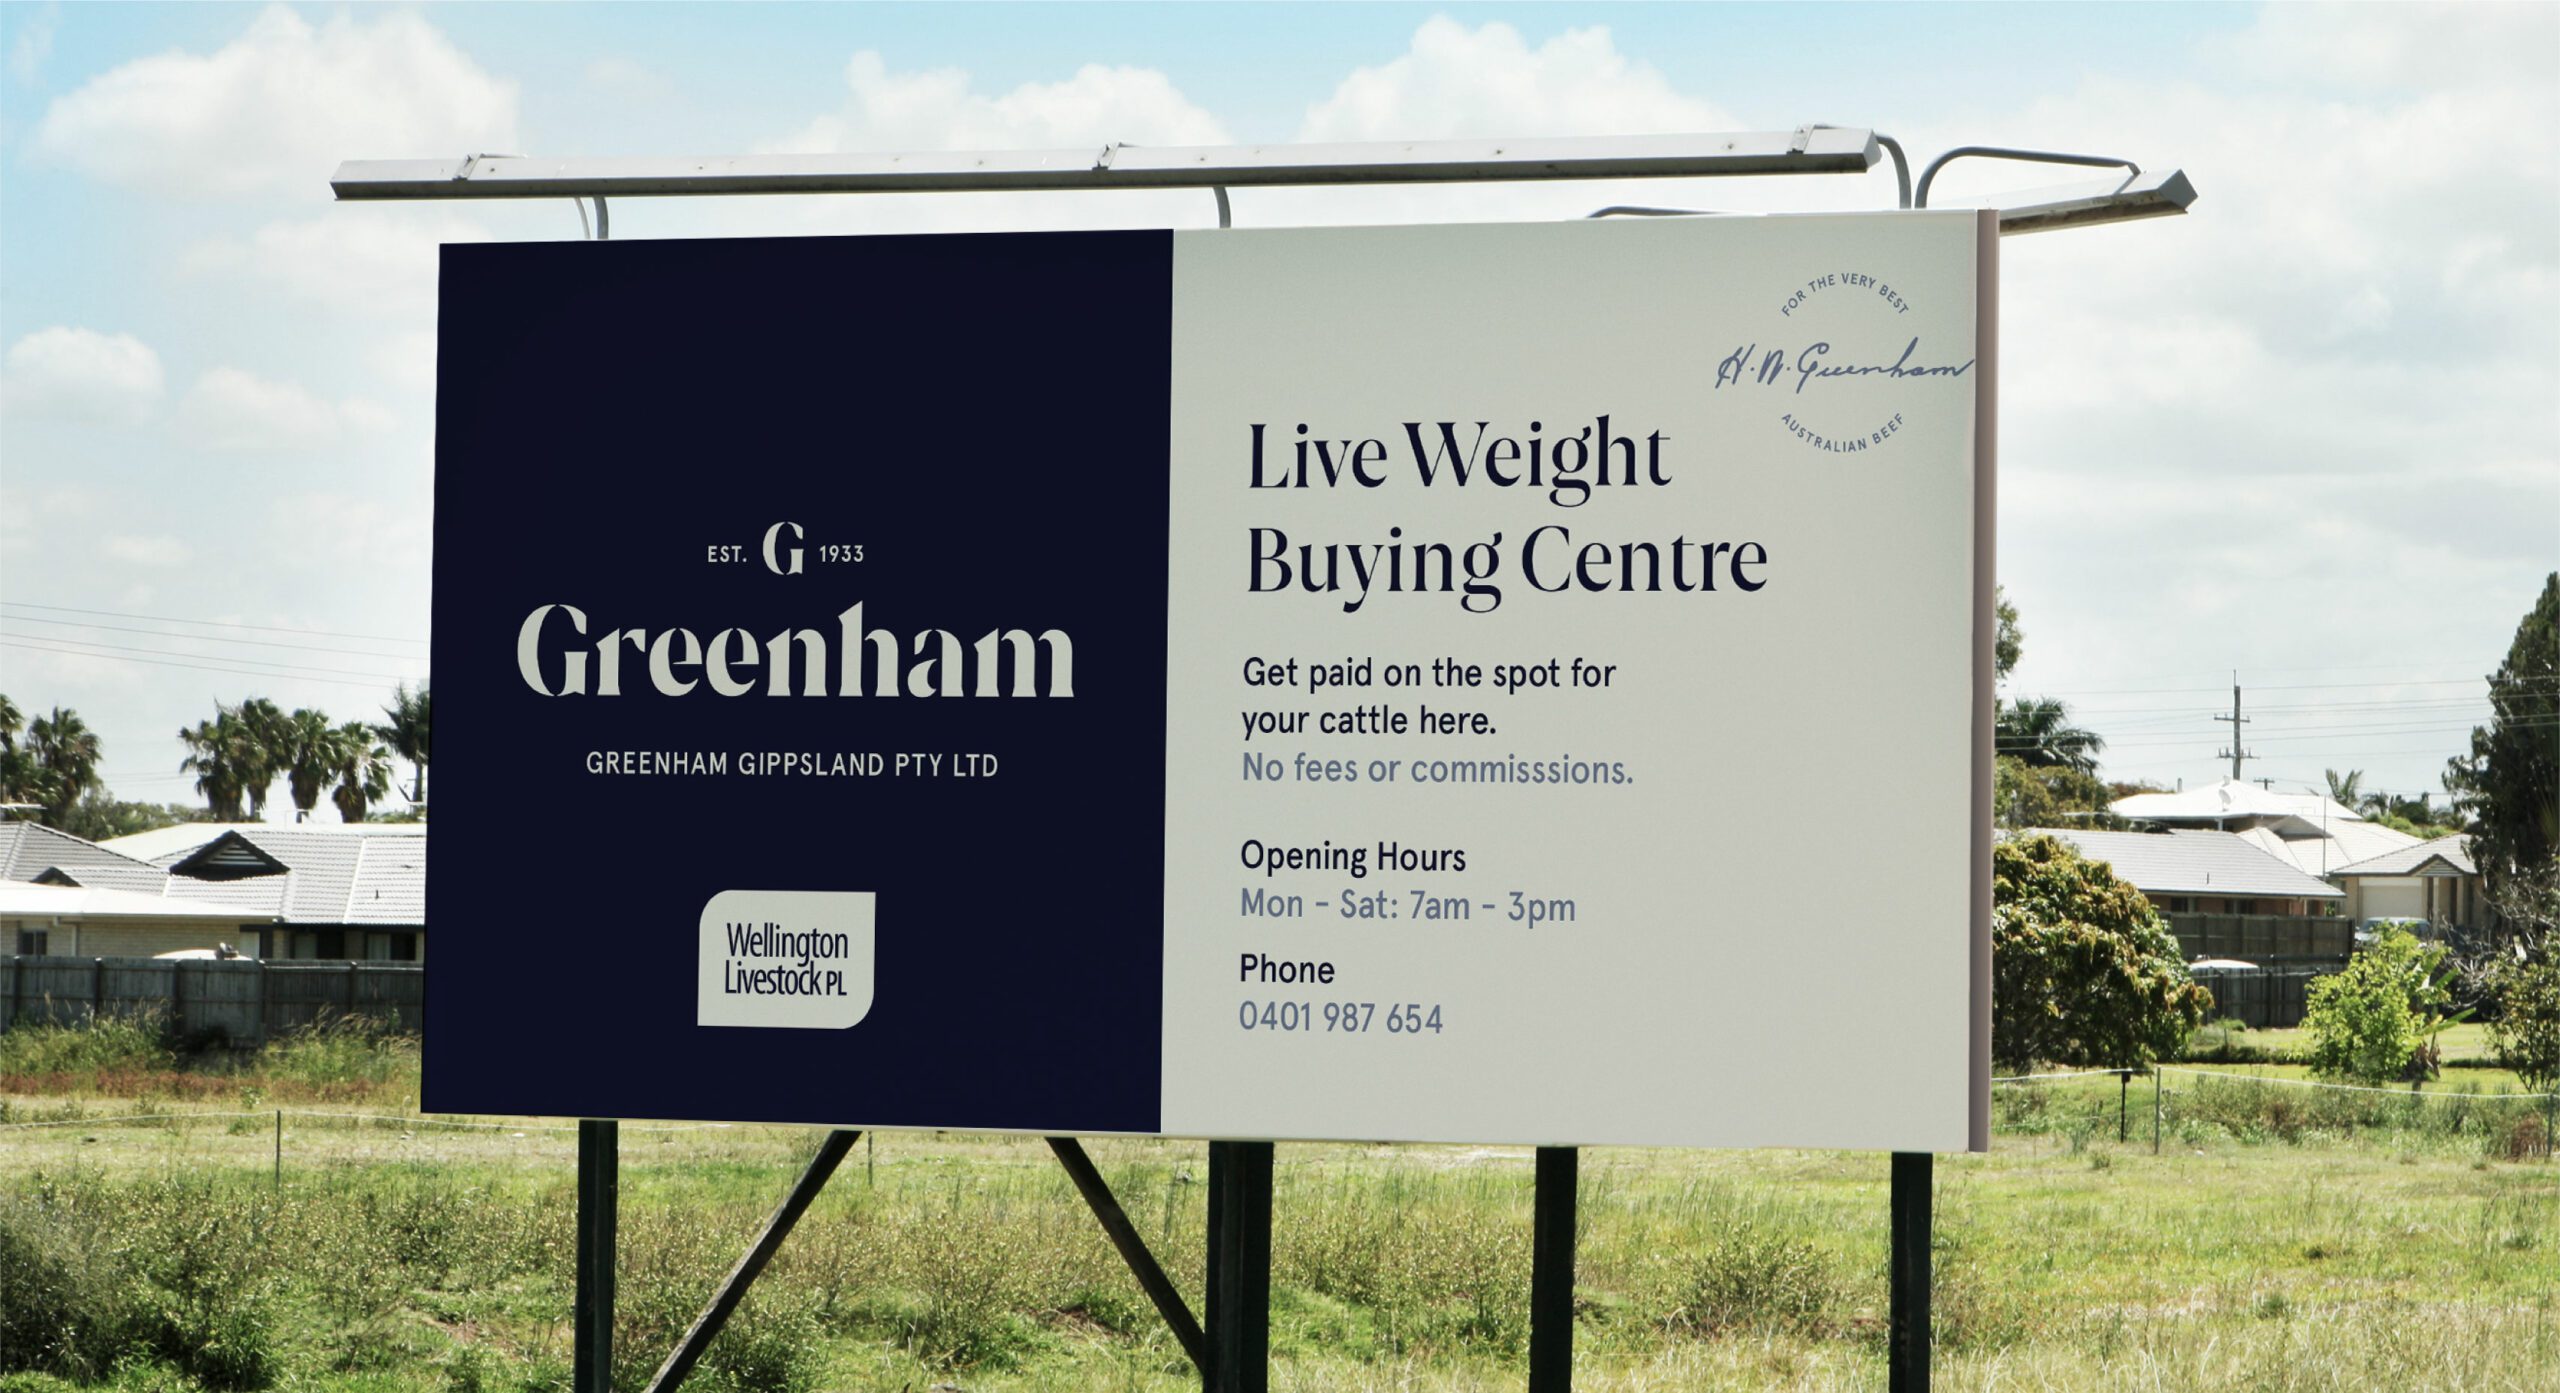 New Greenham Liveweight Brand Identity Signage situated on a Gippsland Farm